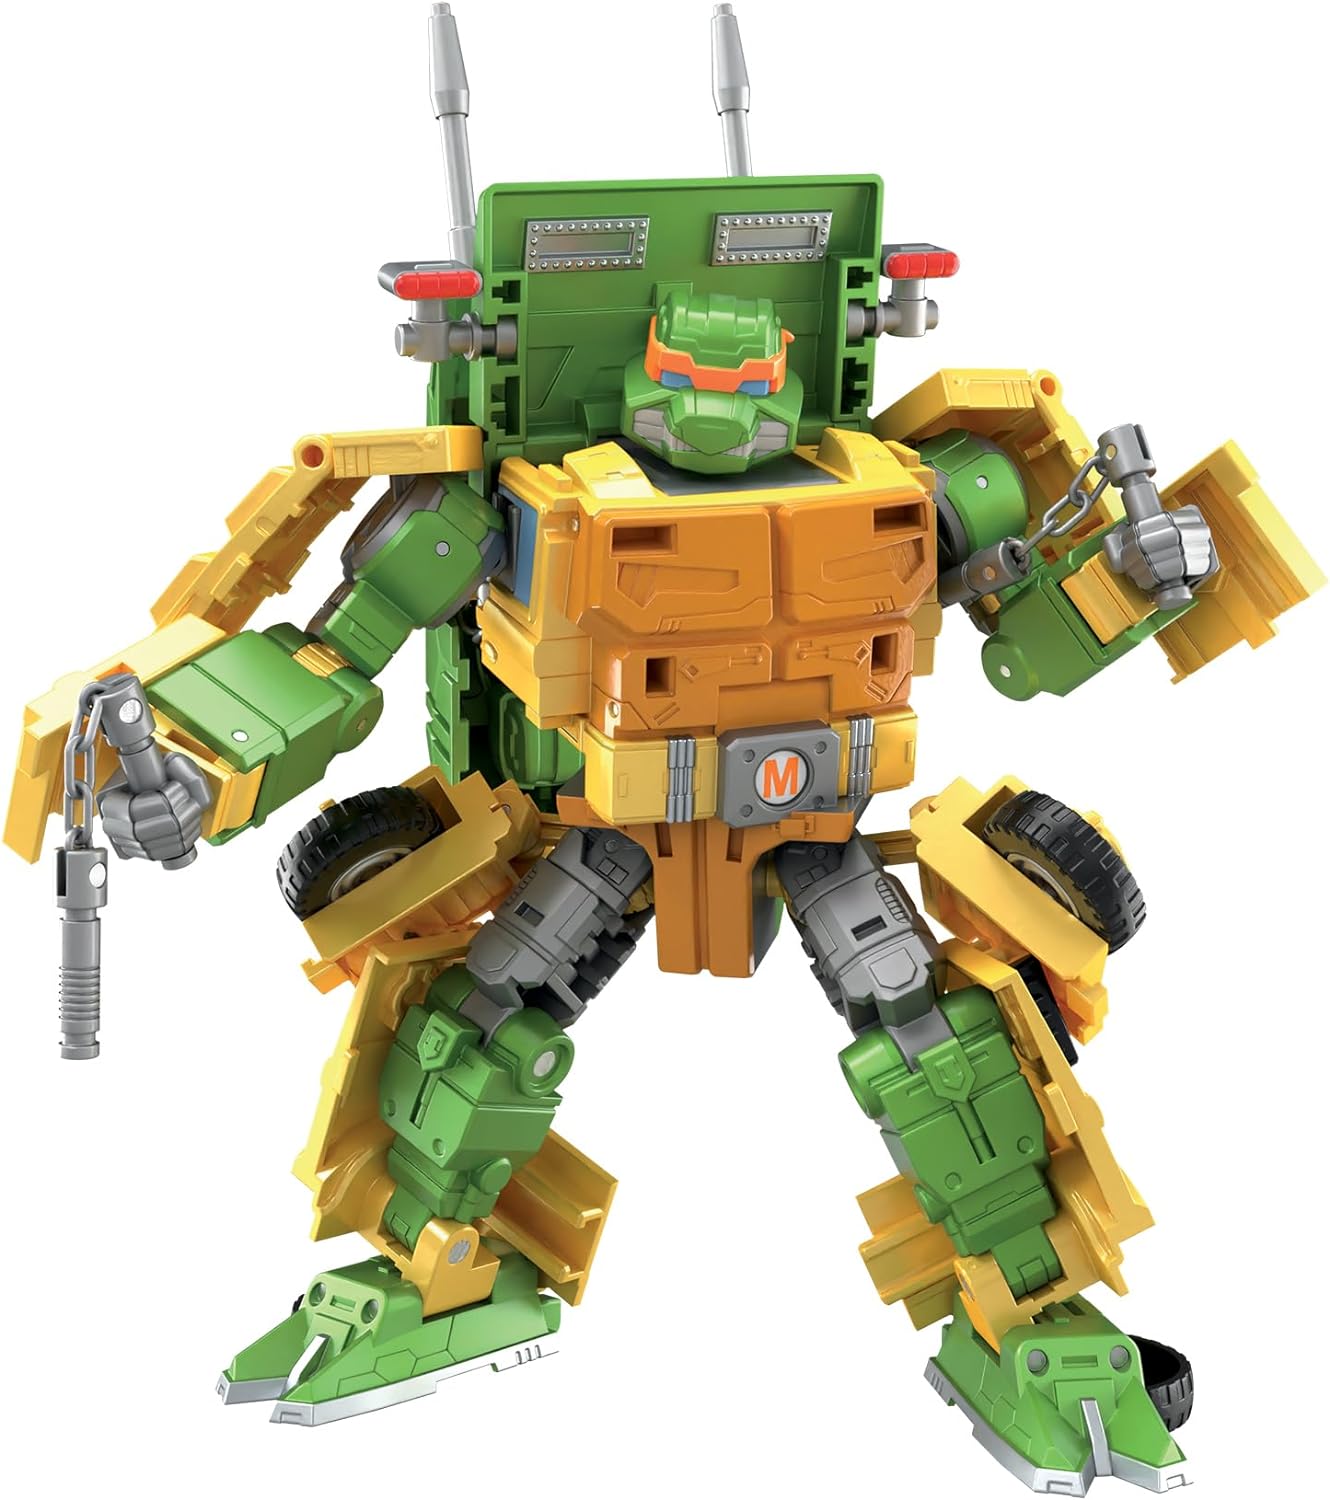 Transformers x TMNT Collaborative Party Wallop Action Figure